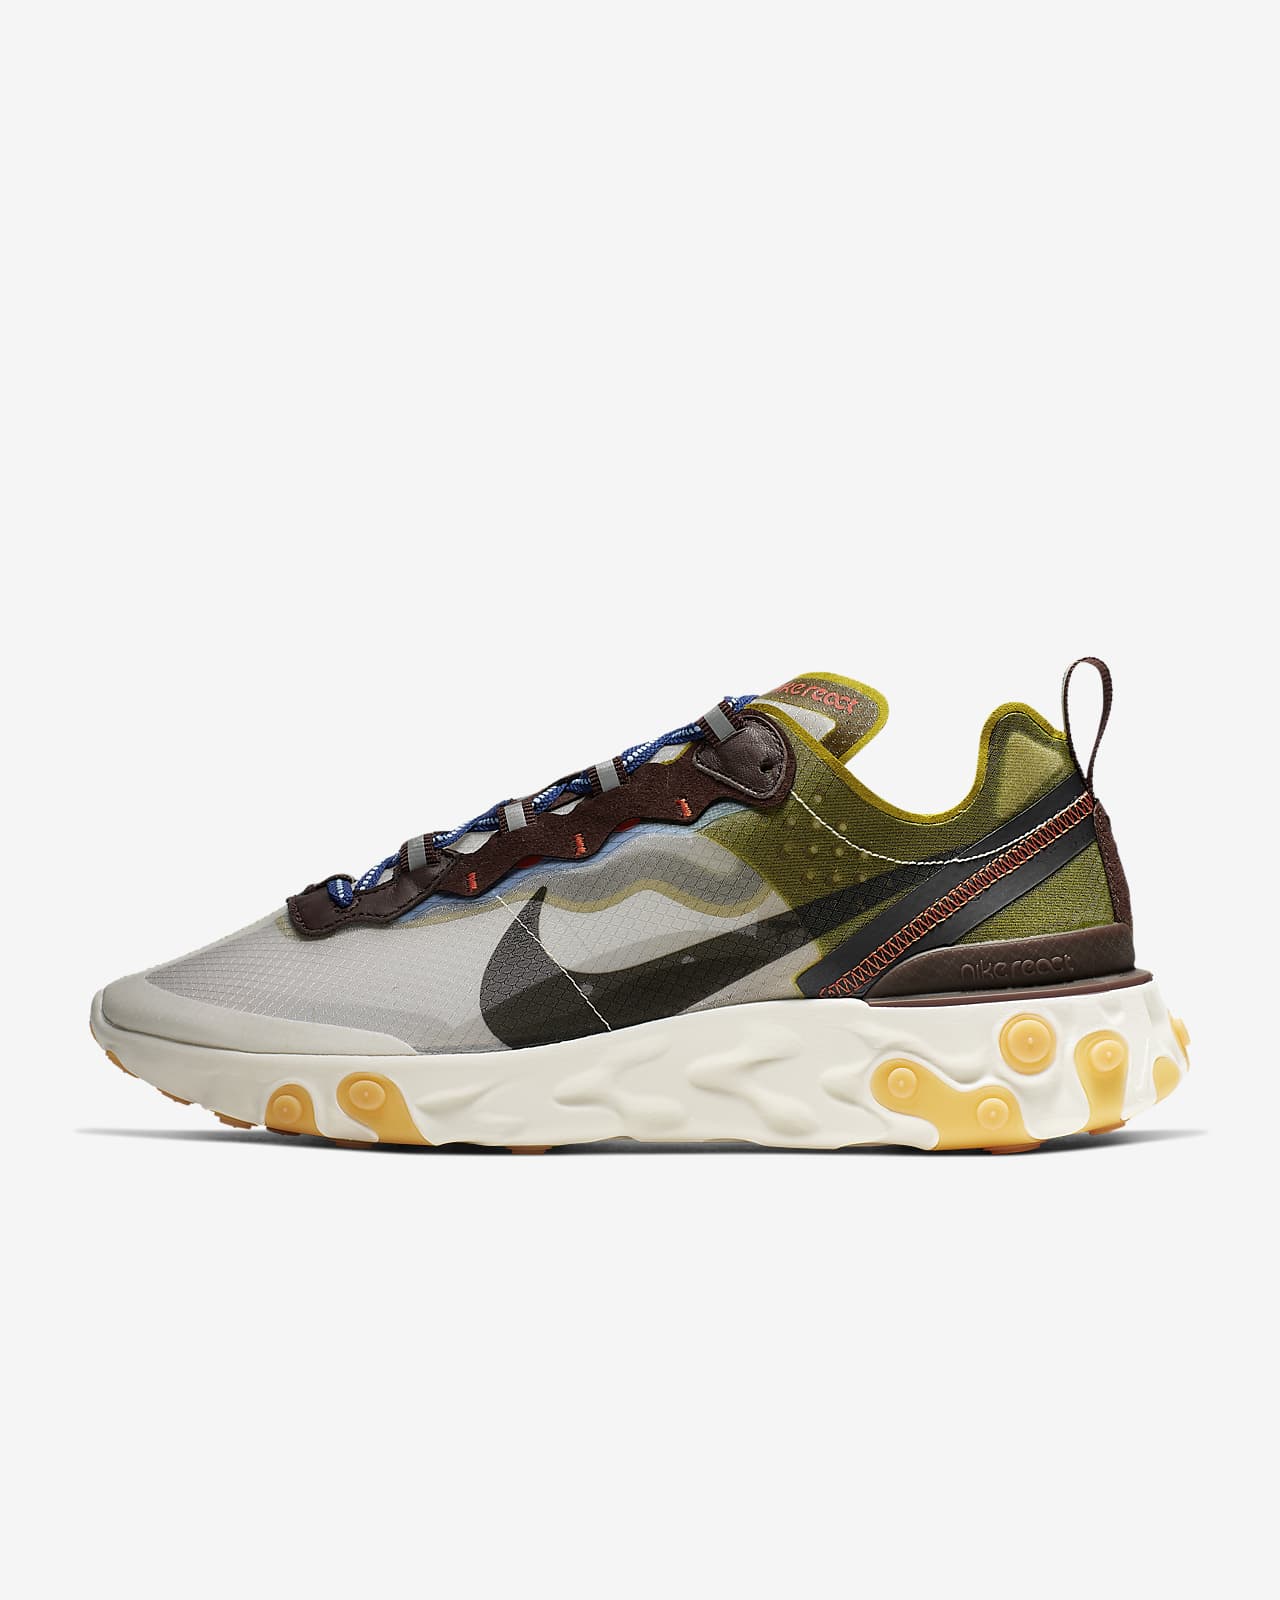 nike react element 87 new release